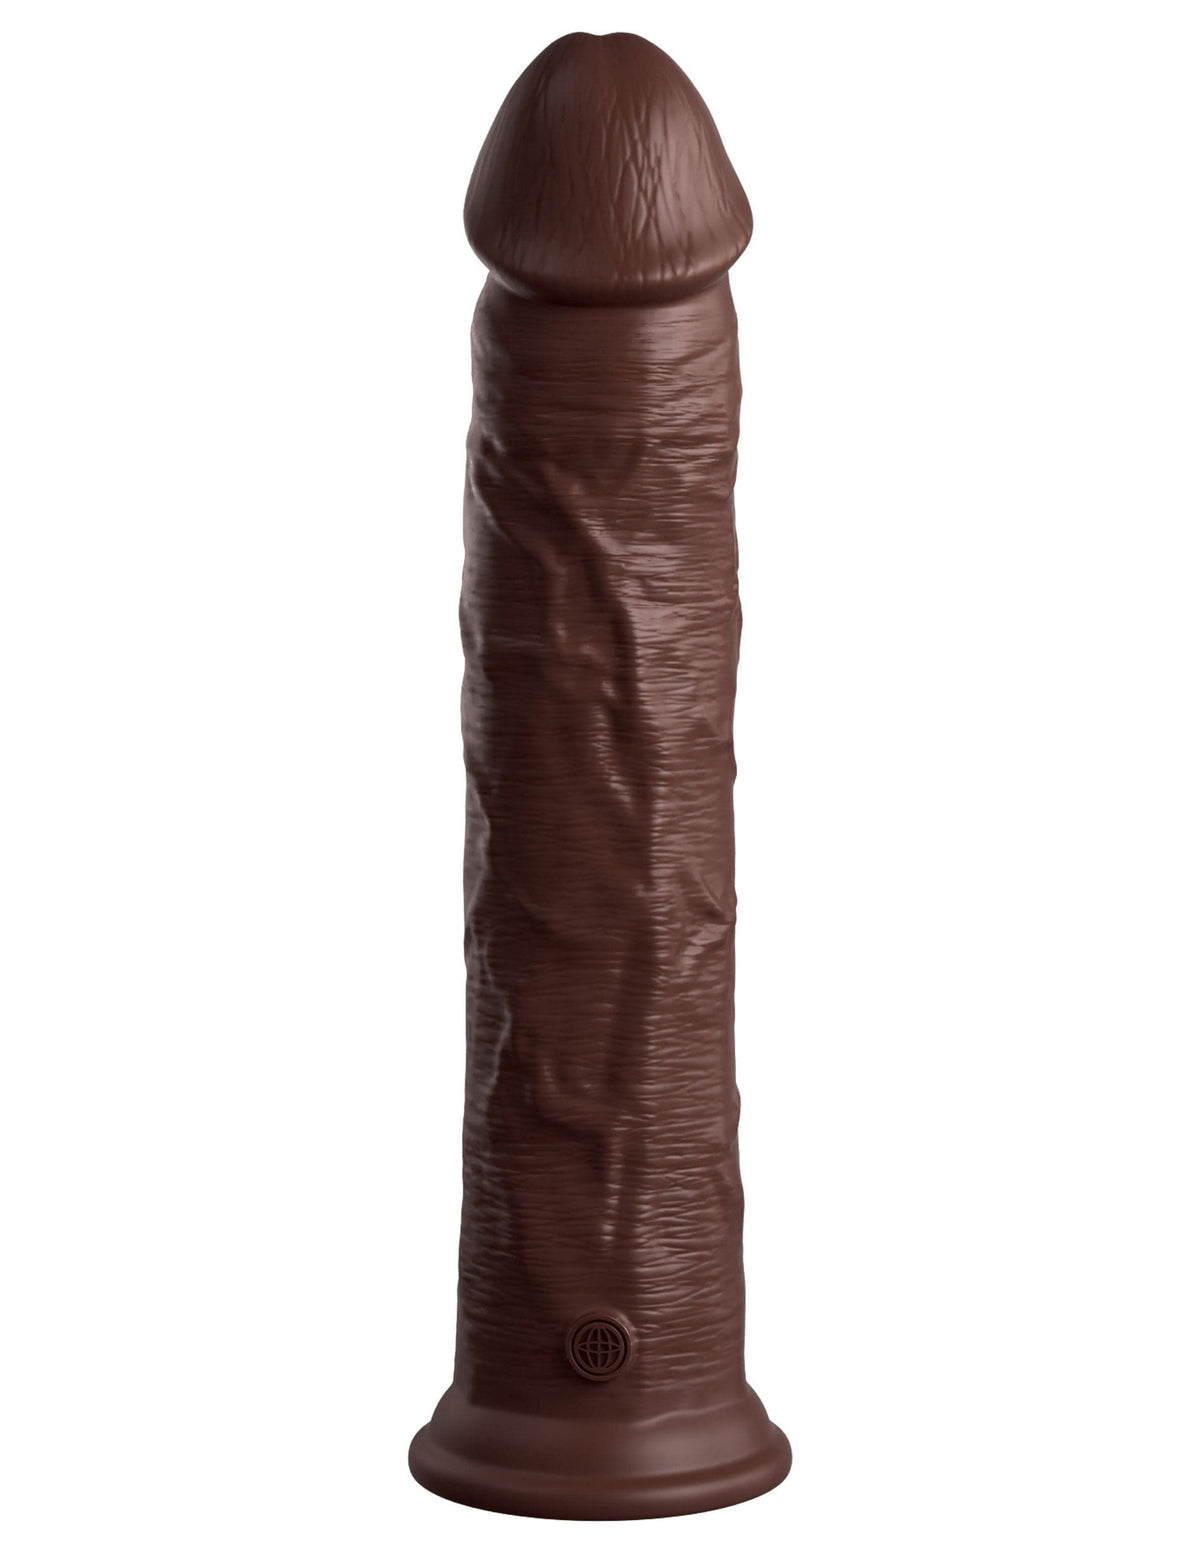 king cock elite 11 inch silicone dual density cock brown